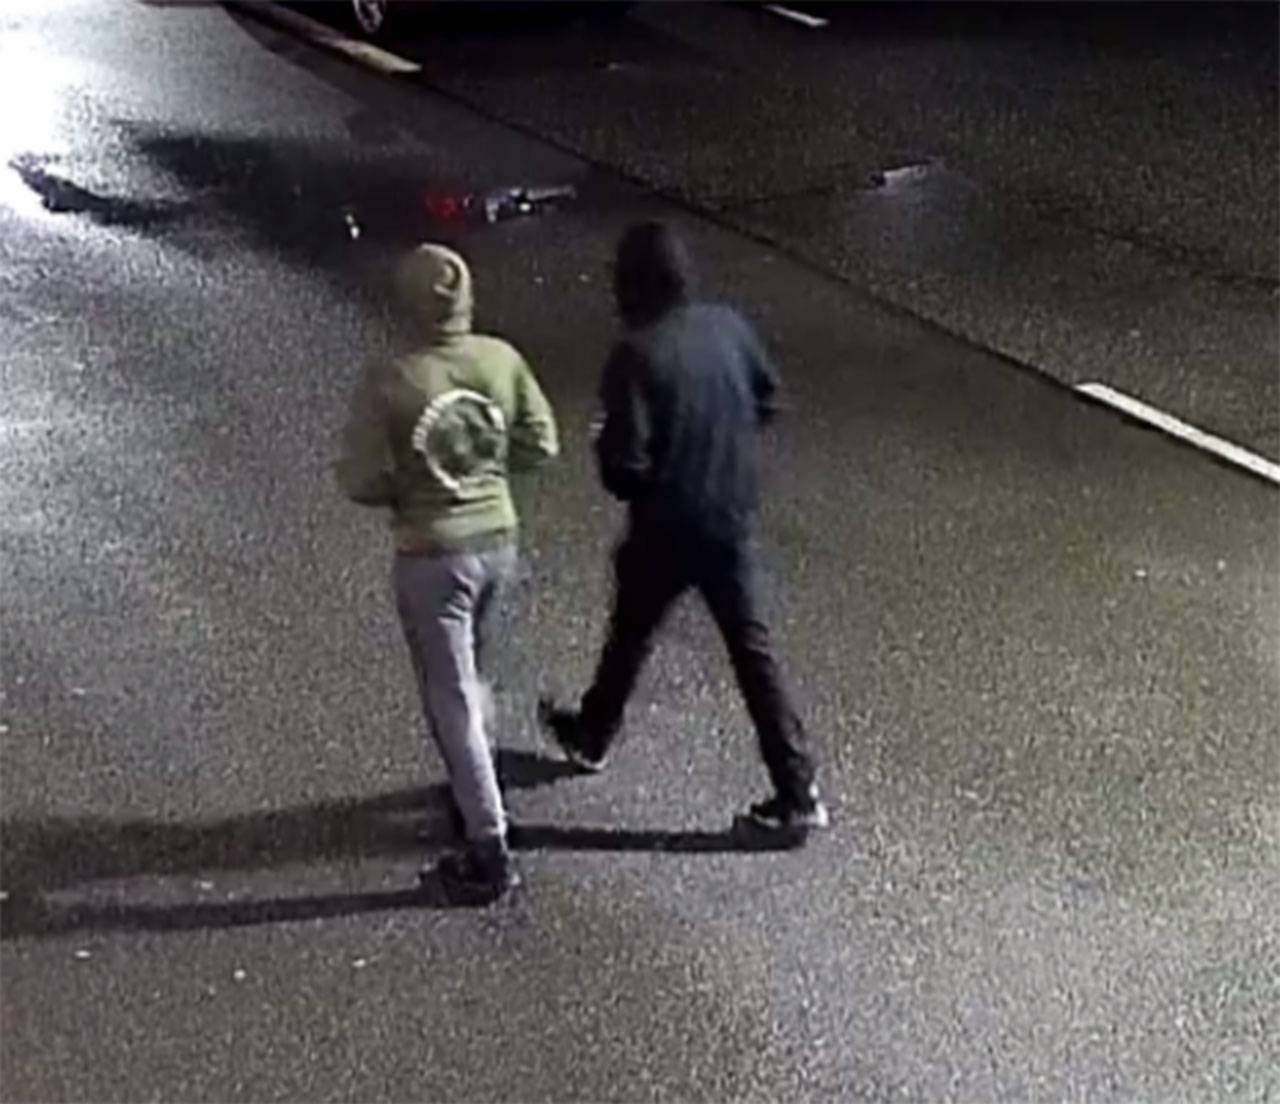 The suspects fleeing the scene. Visual courtesy of Kirkland police